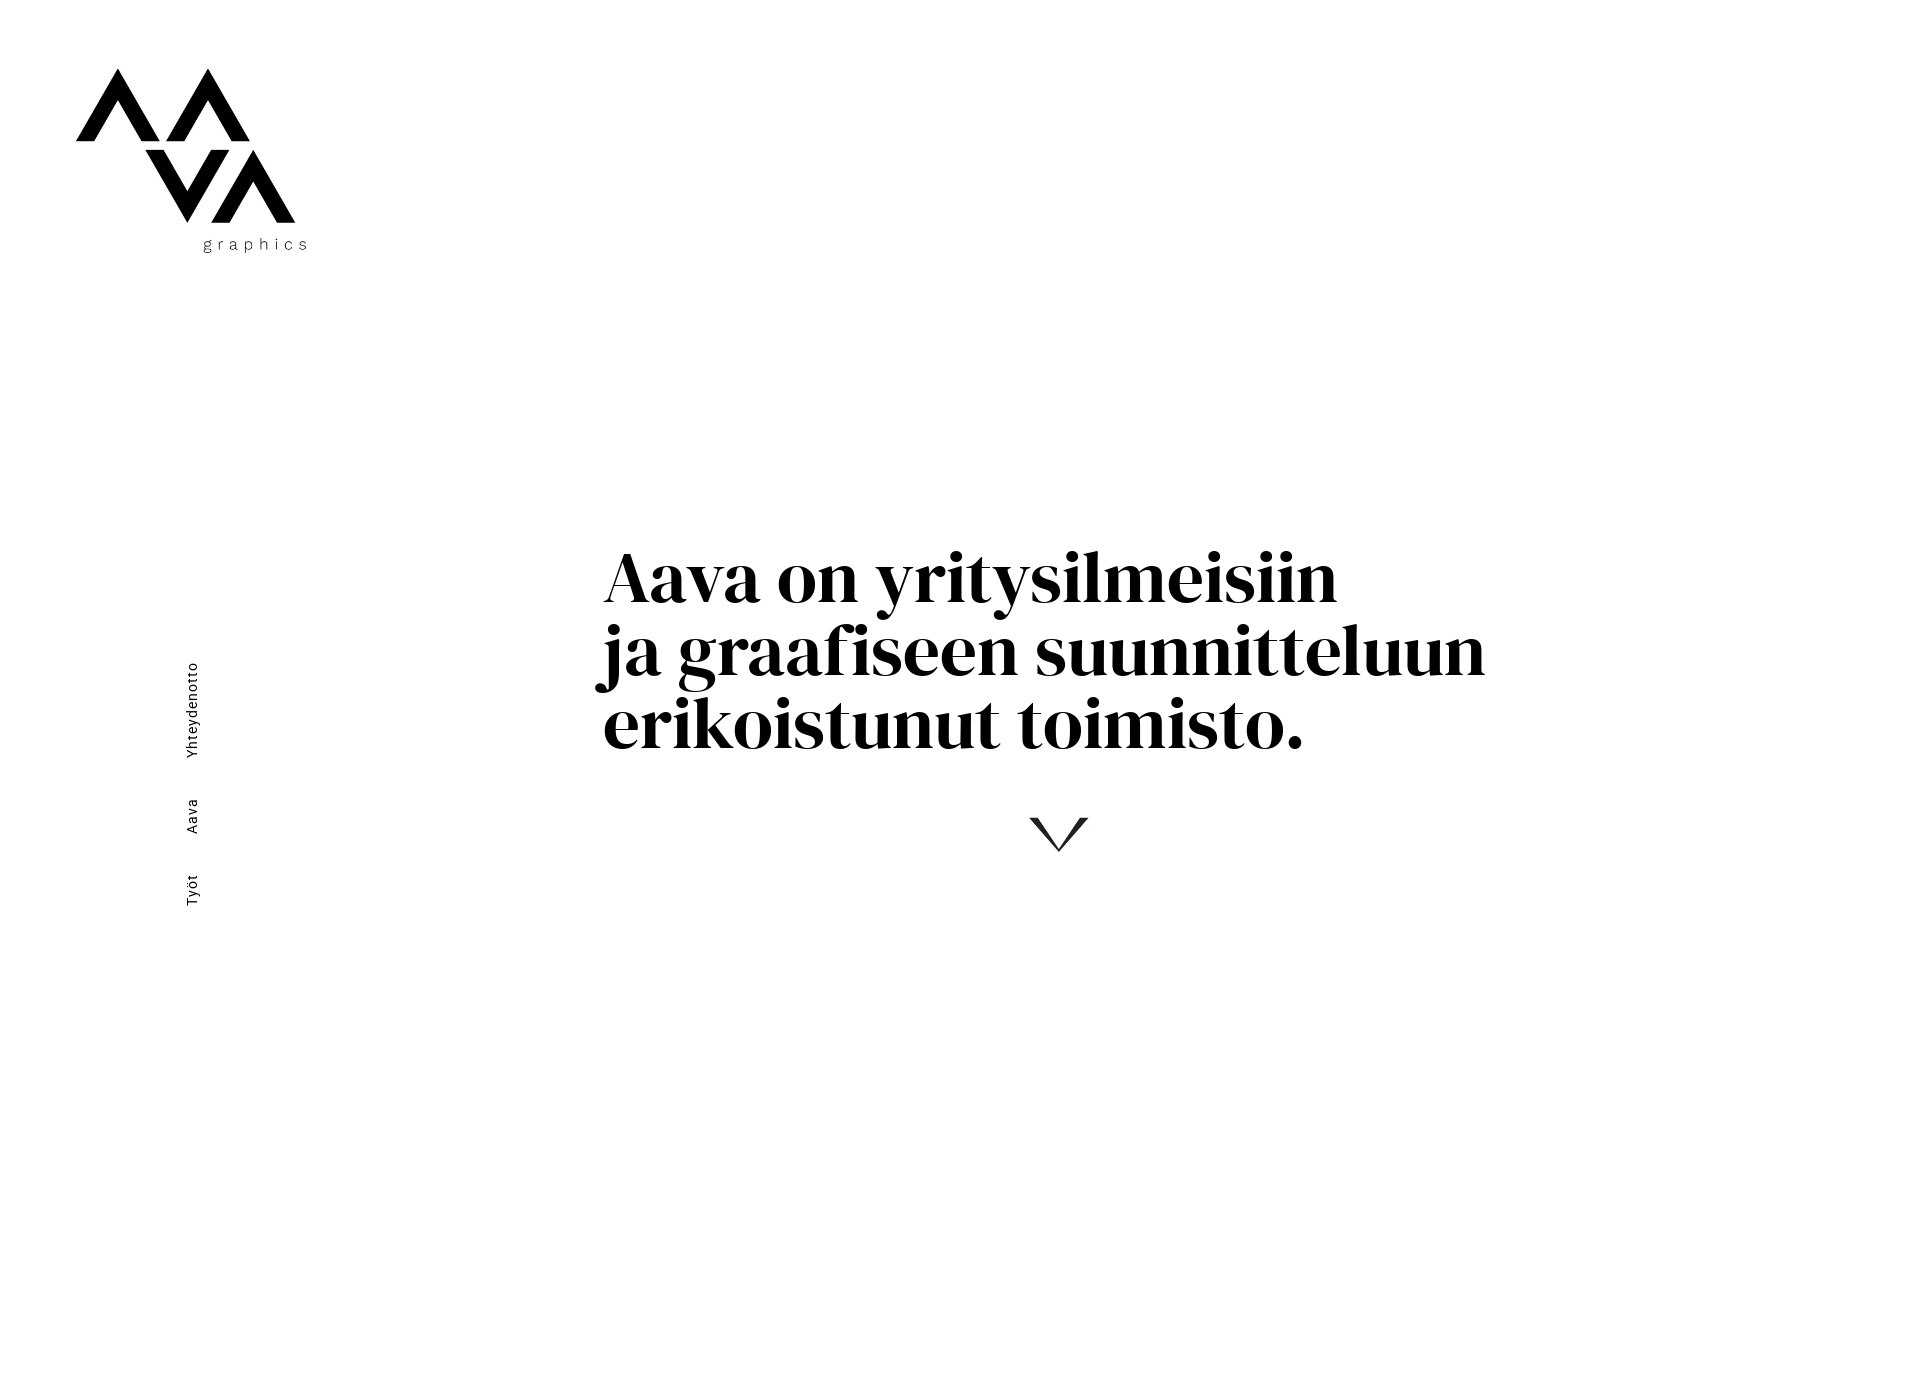 Screenshot for aavagraphics.fi